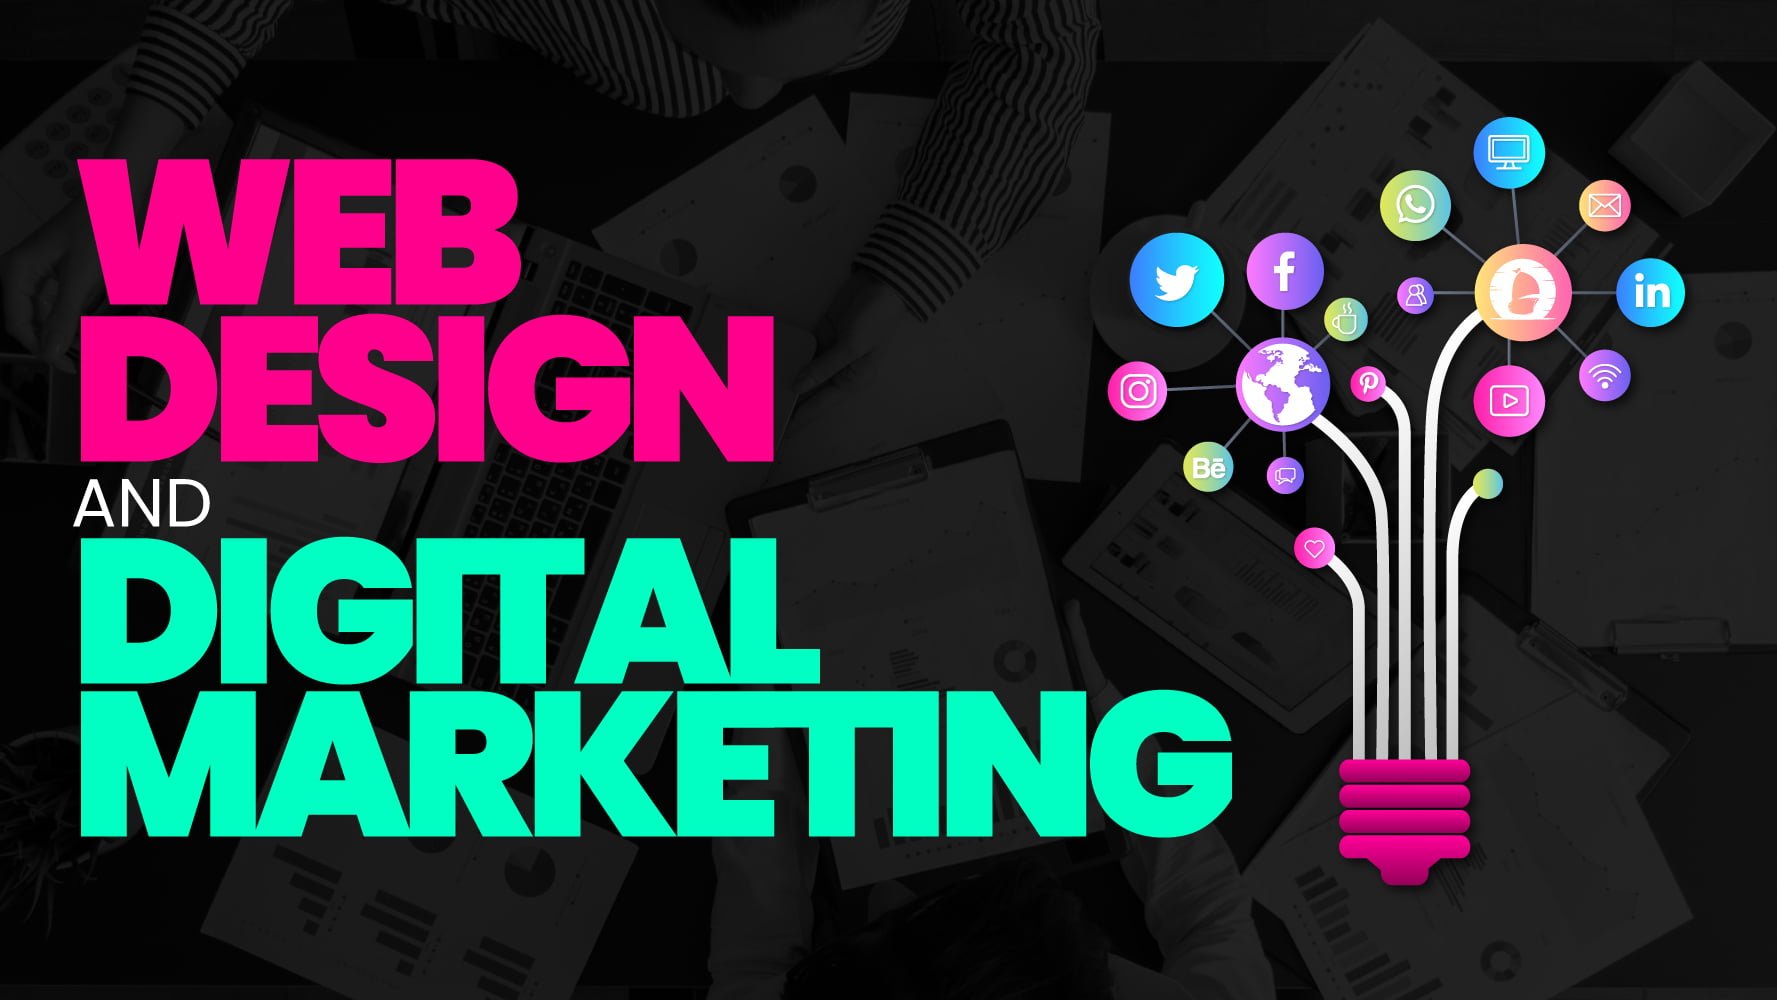 Web Design And Digital Marketing: How To Boost Online Success